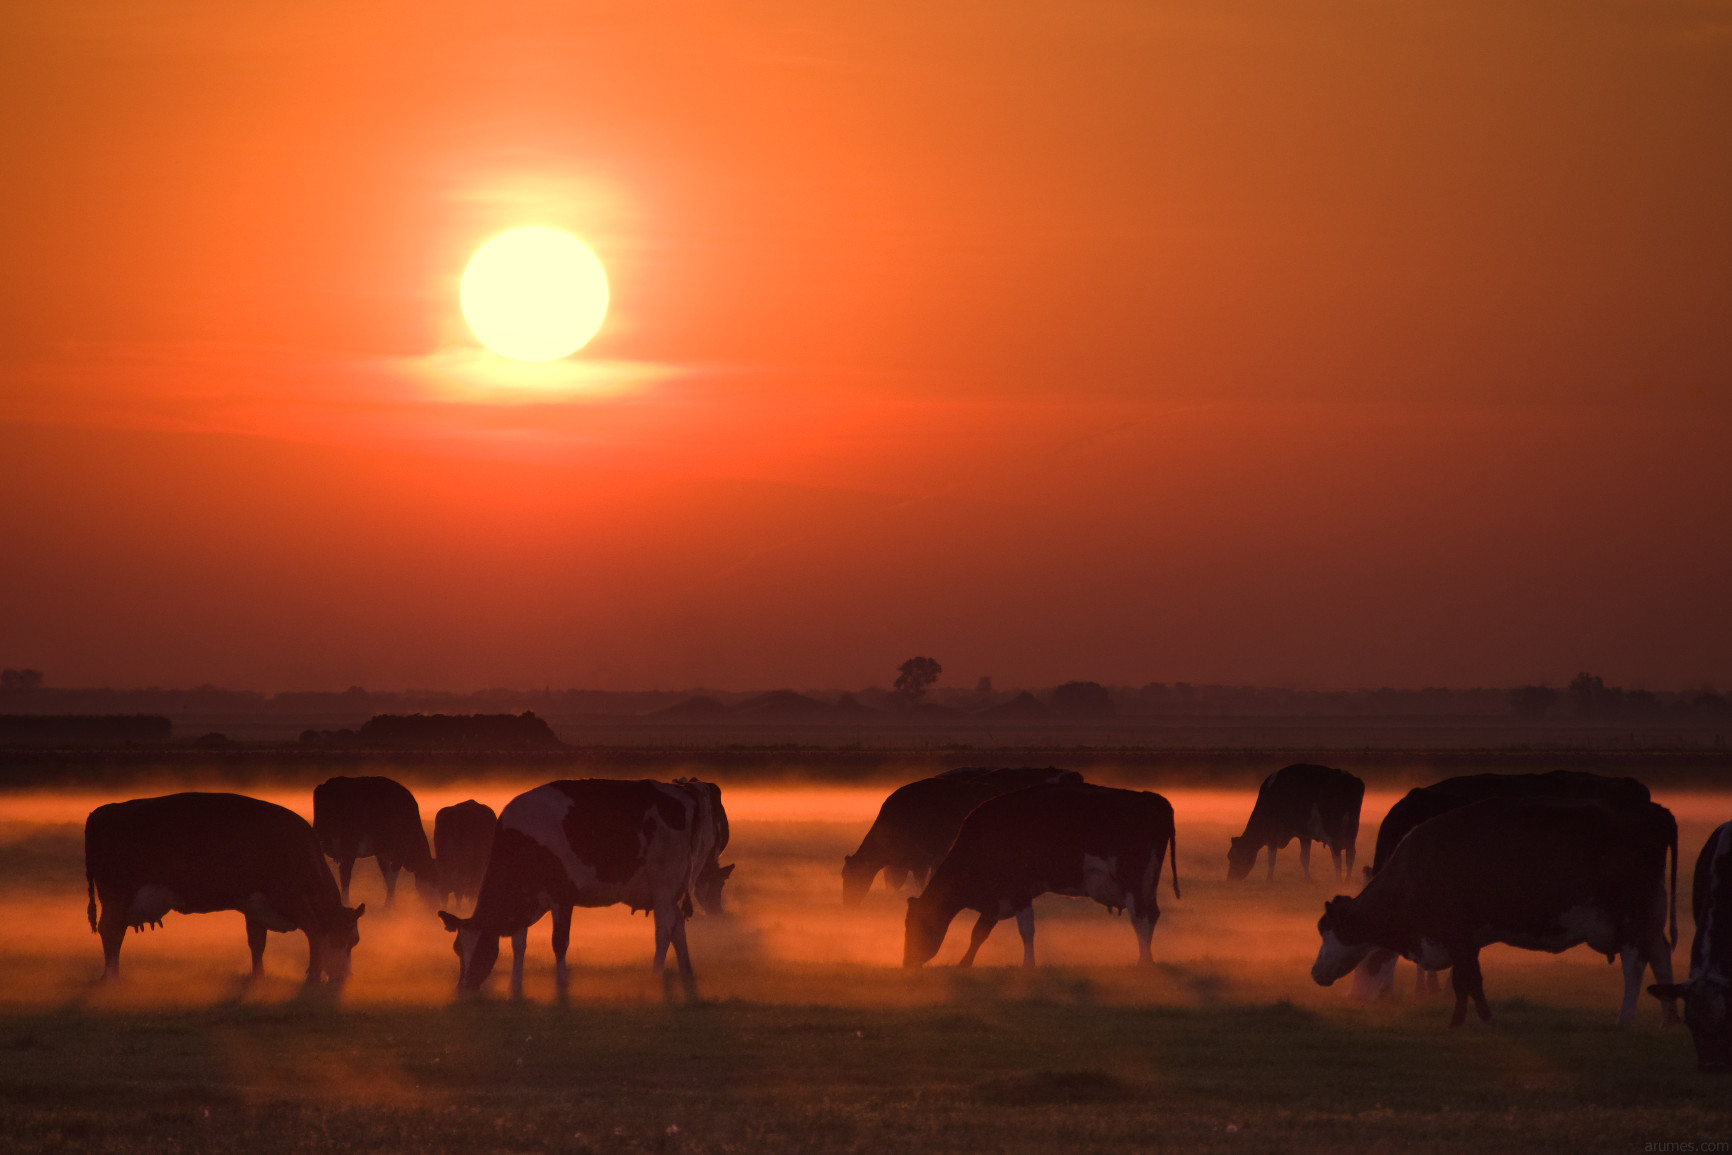 Red tinted image, sunrise with cows in foreground